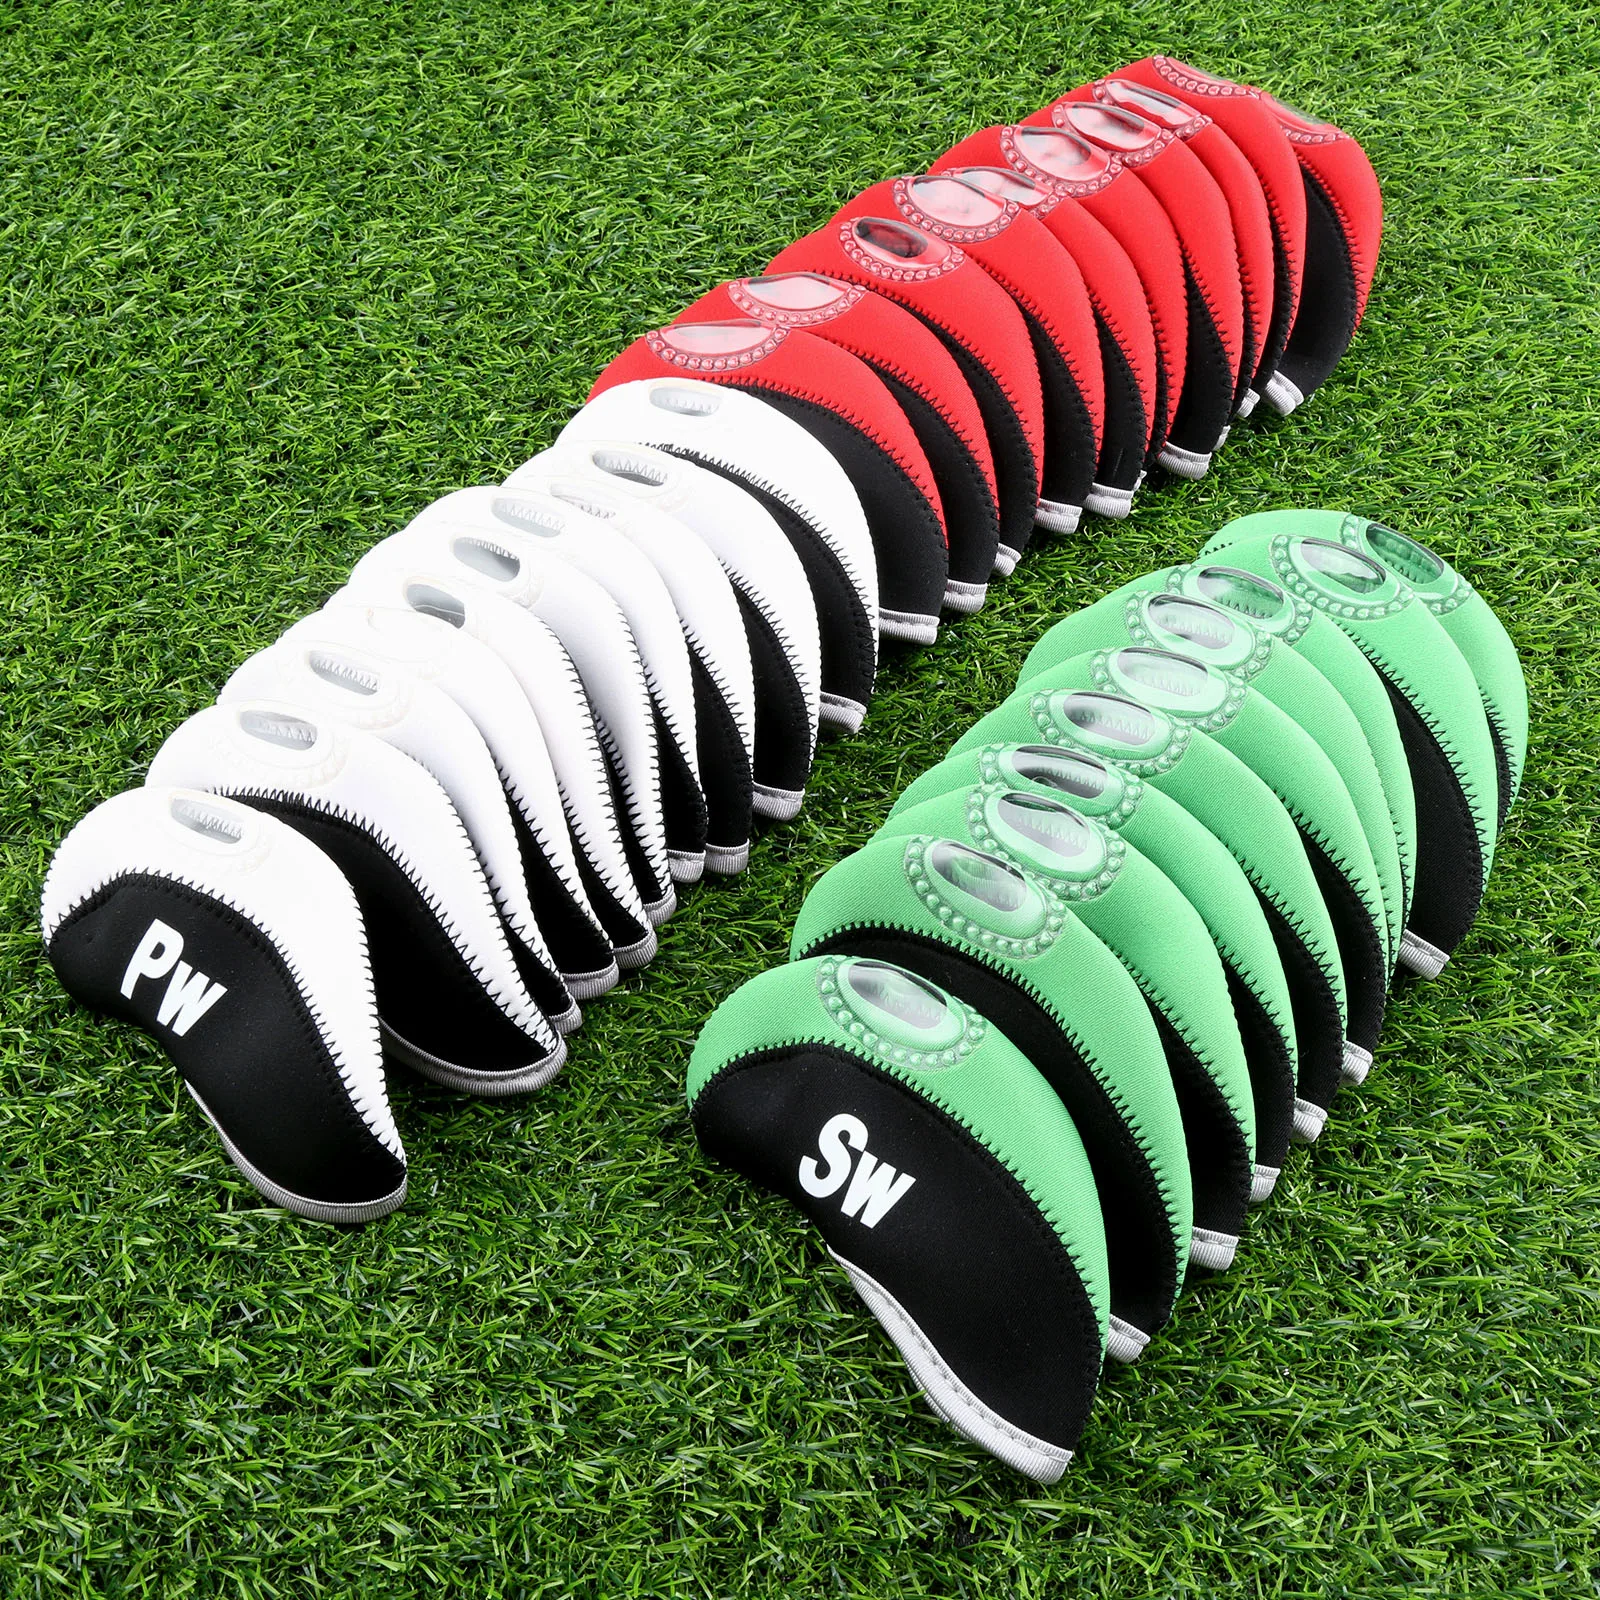 10Pcs Neoprene Transparent Window Golf Club Iron Head Covers Headcover With Numbers (3.4.5.6.7.8.9.PW.SW And A) Golf Club Heads